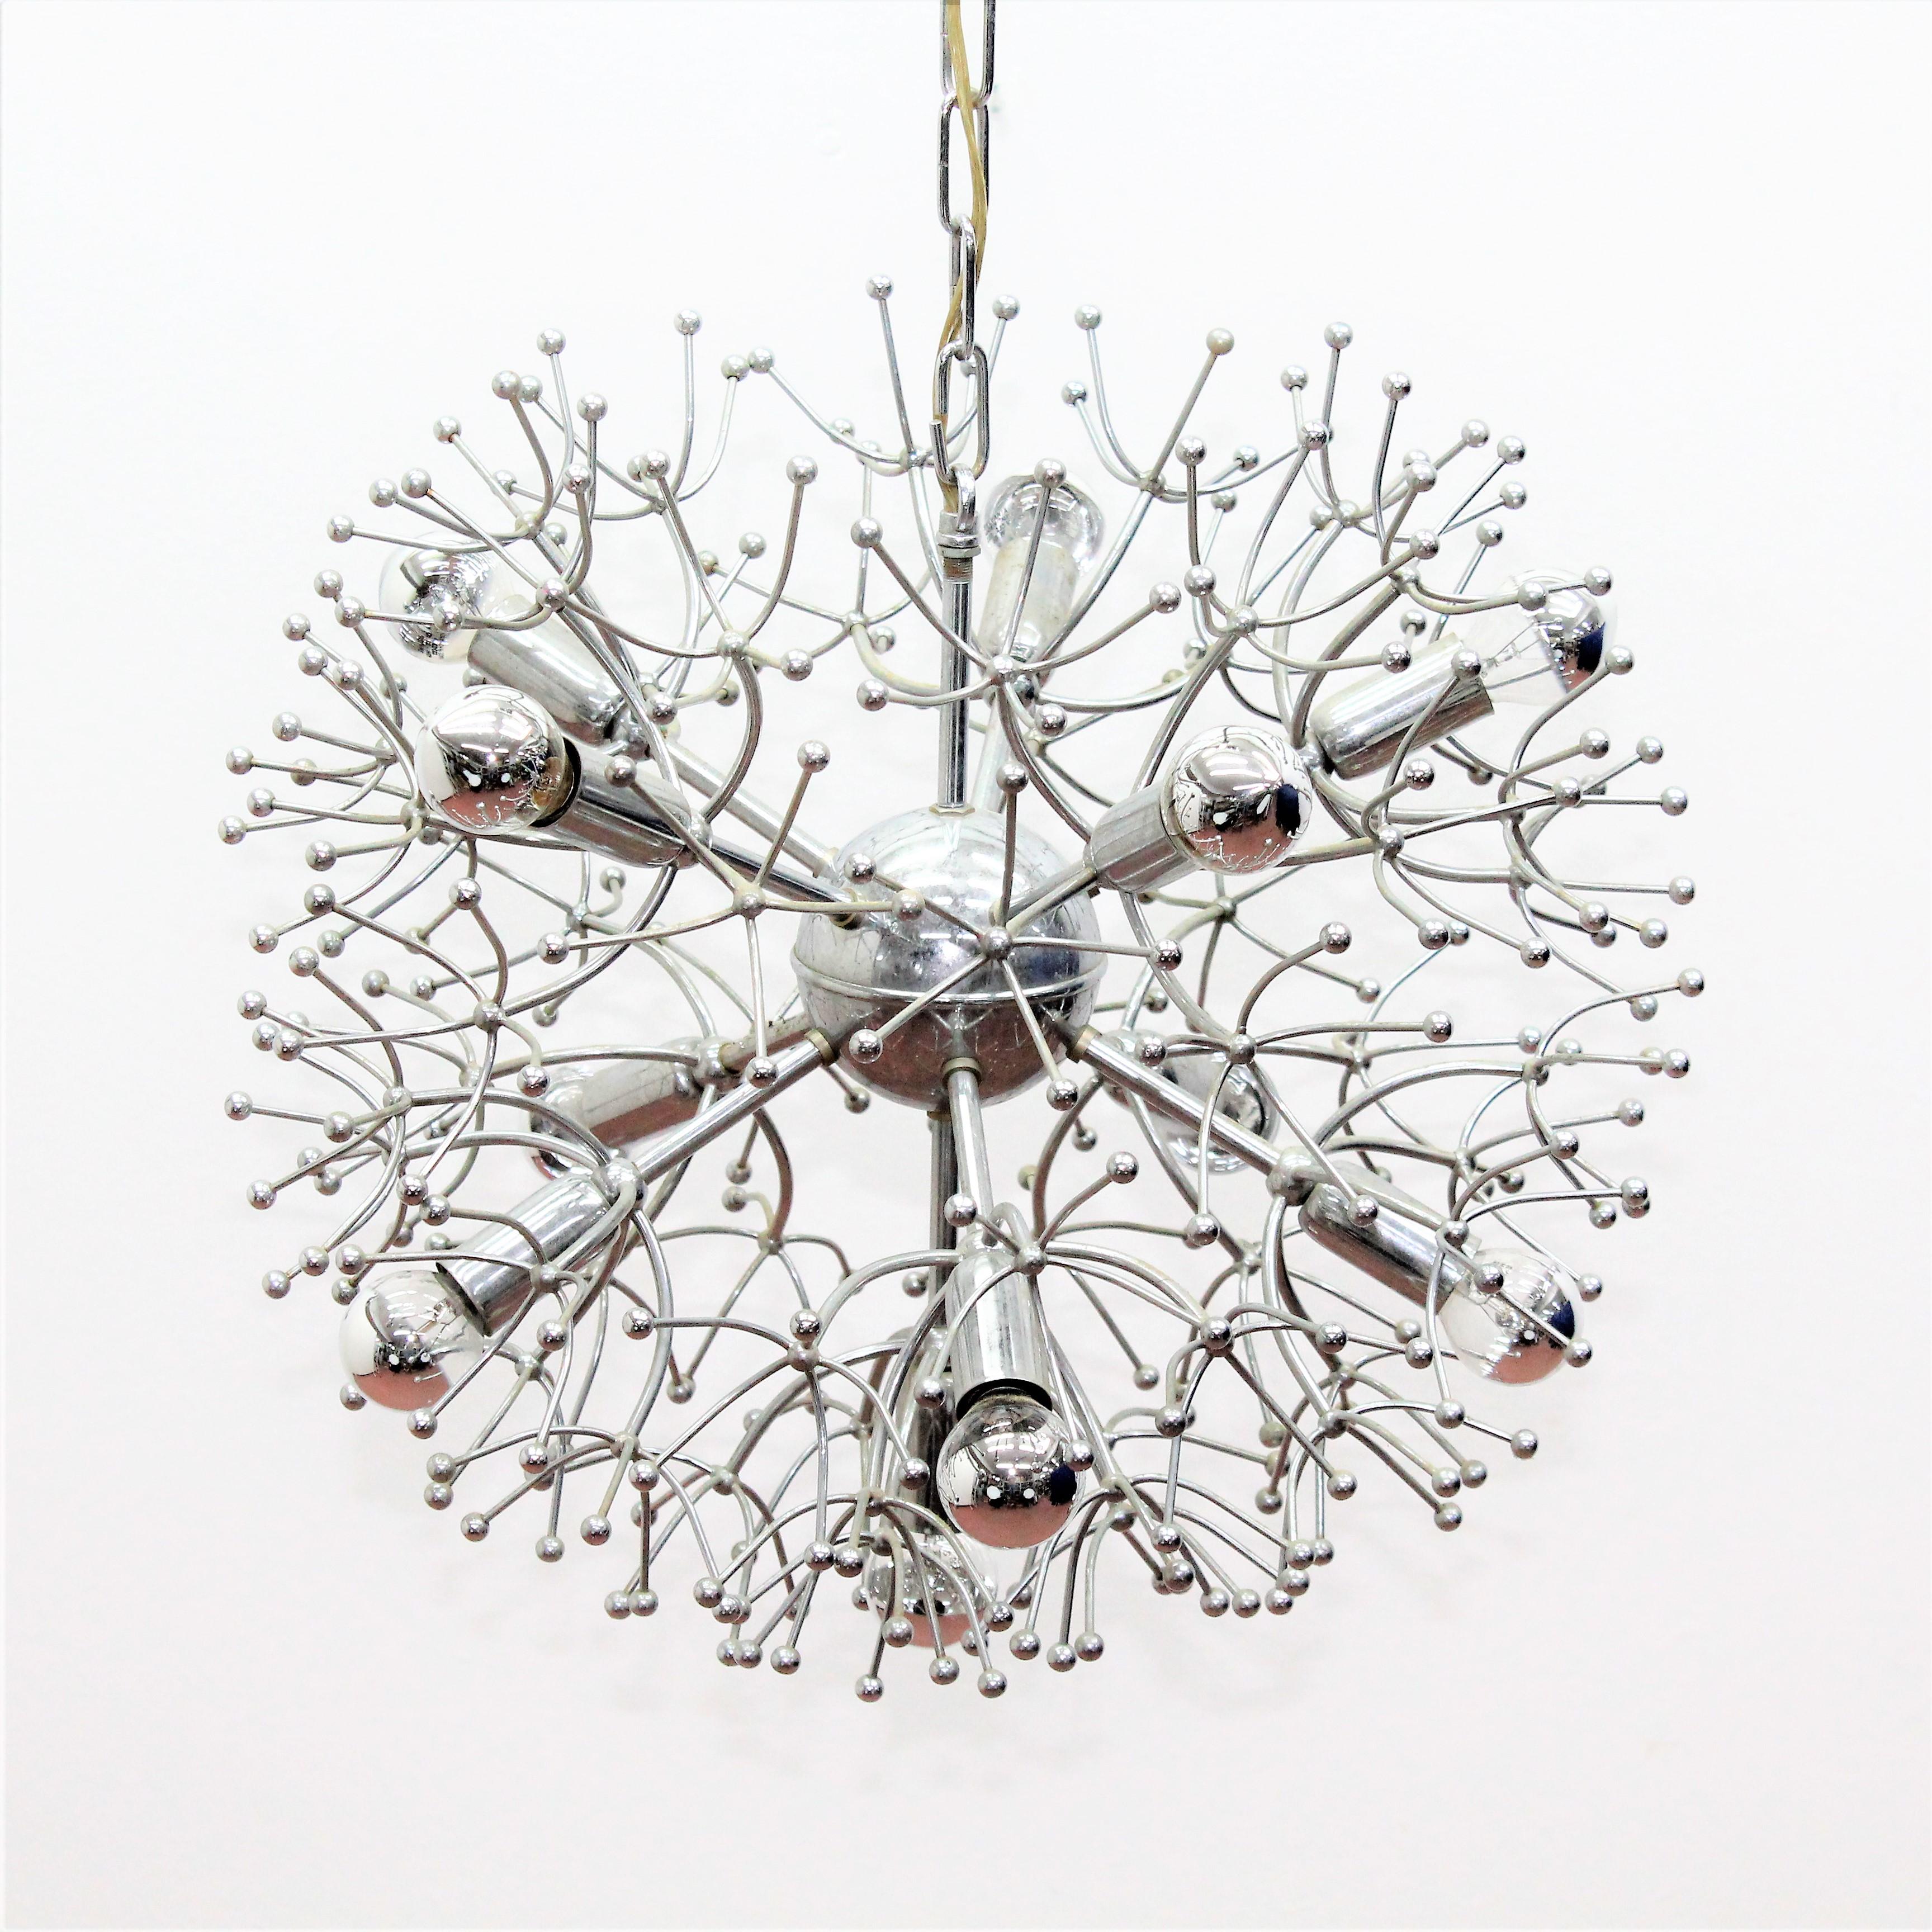 Nice and original Italian chandelier, shaped like a Sputnik, designed by Gaetano Sciolari in circa 1960. Chromium-plated metal, 11 lights.
Wear consistent with age and use.